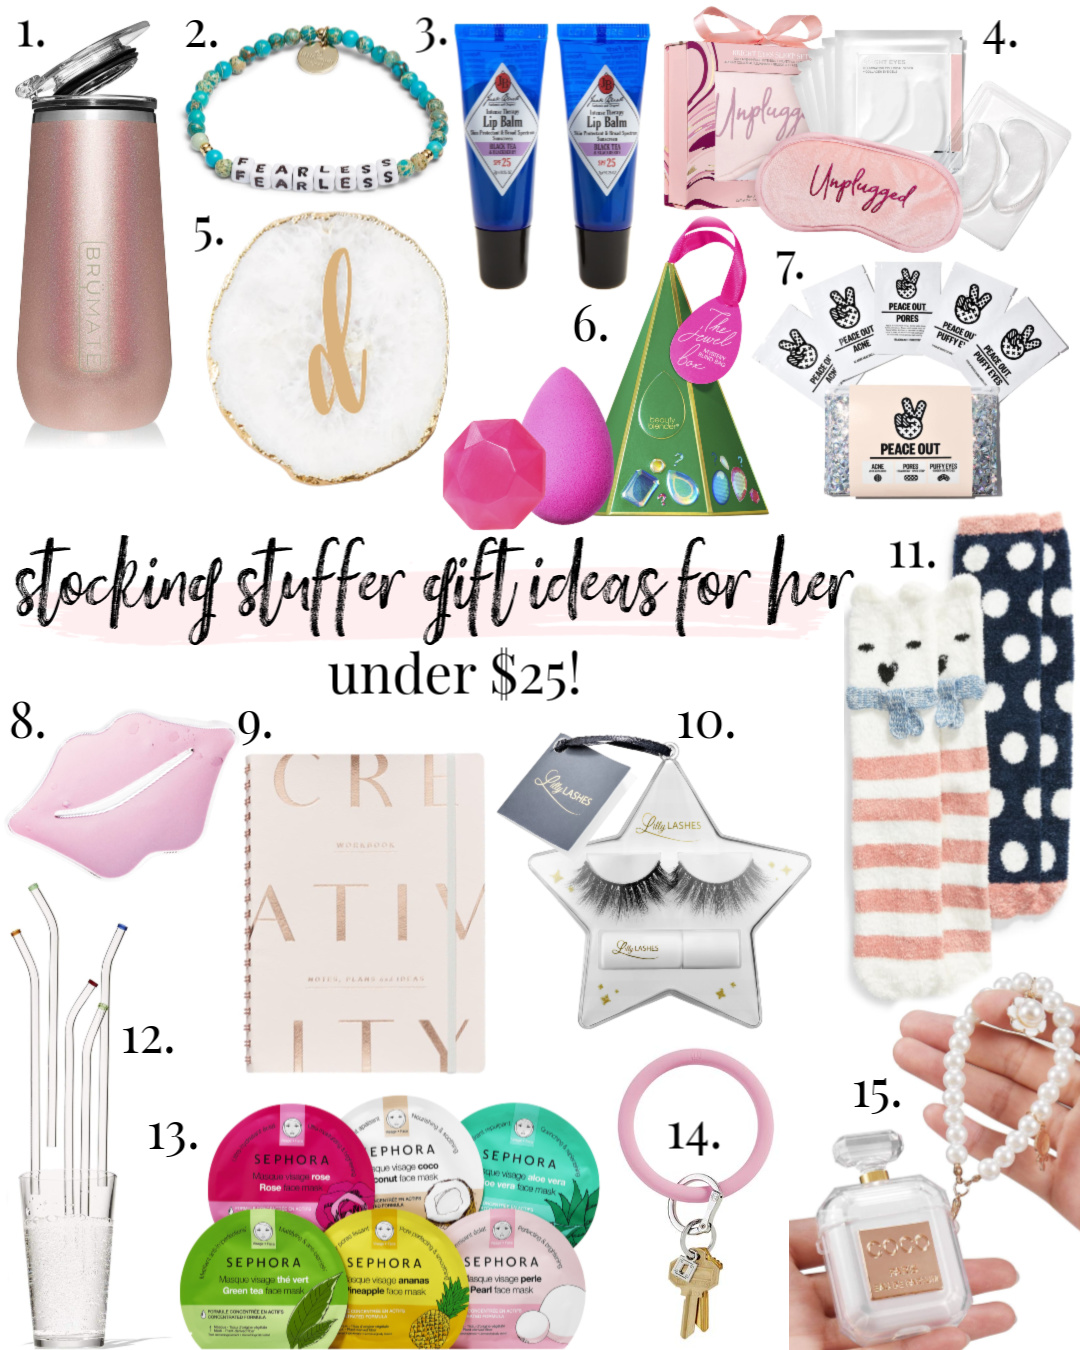 Stocking Stuffer Gift Ideas for her under $25 and $50 - Lil bits